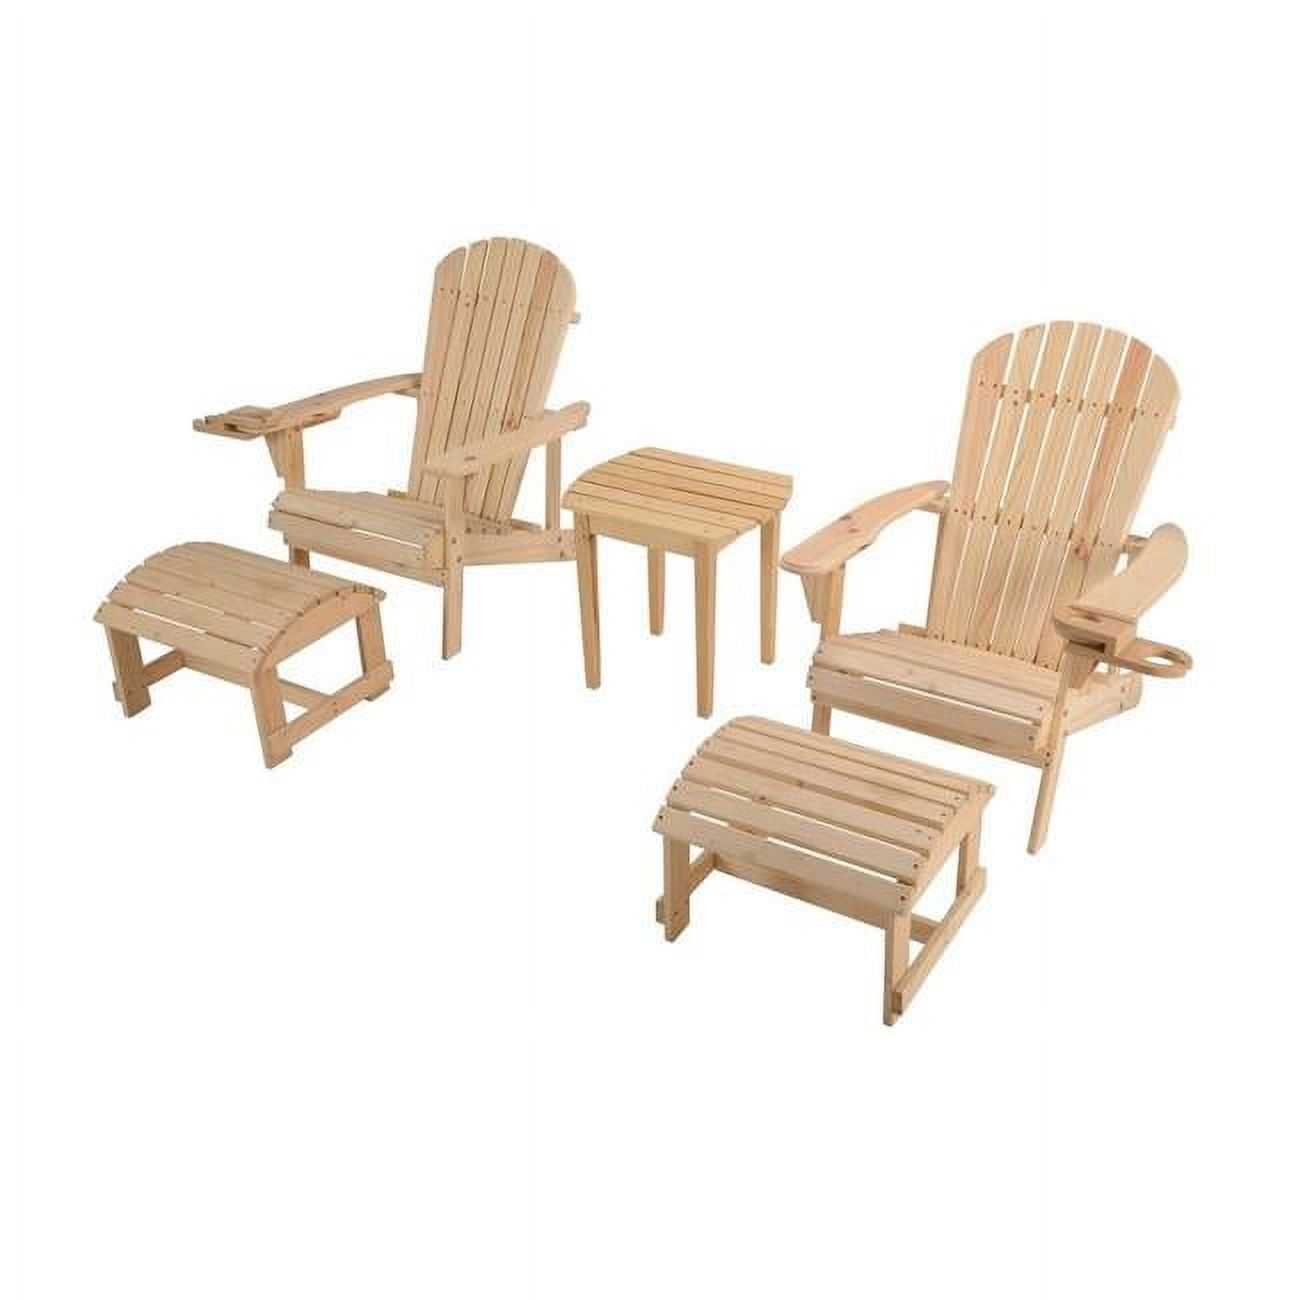 Best Desu  Earth Collection Adirondack Chair with phone and cup holder (2 Chairs, 2 Ottoman and End table set) - image 1 of 5